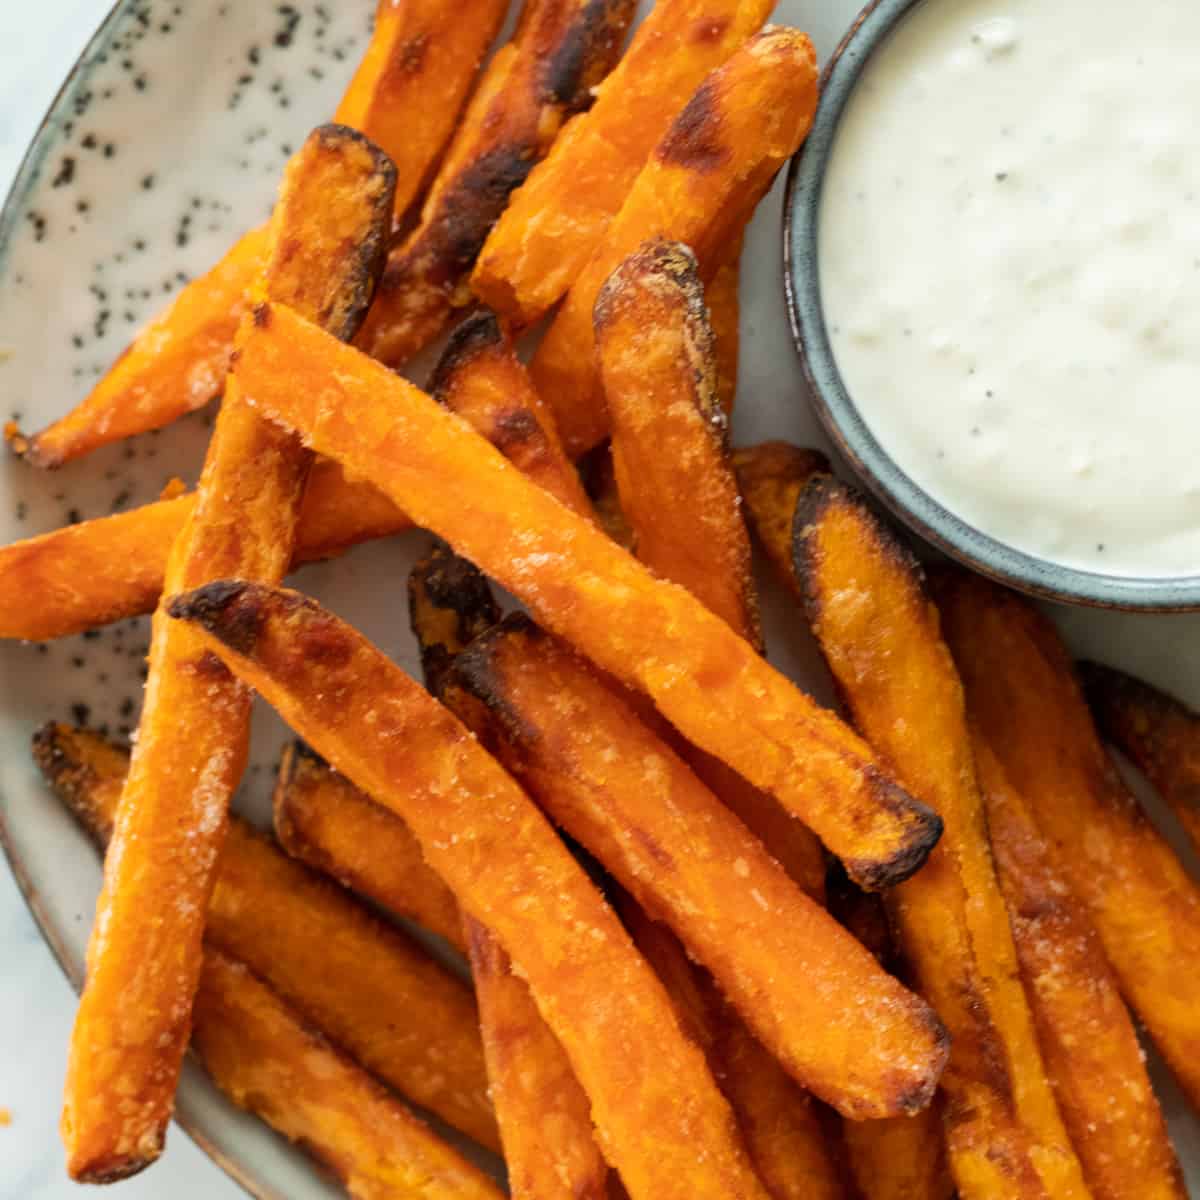 sweet potatoes on a plate next to a dipping sauce